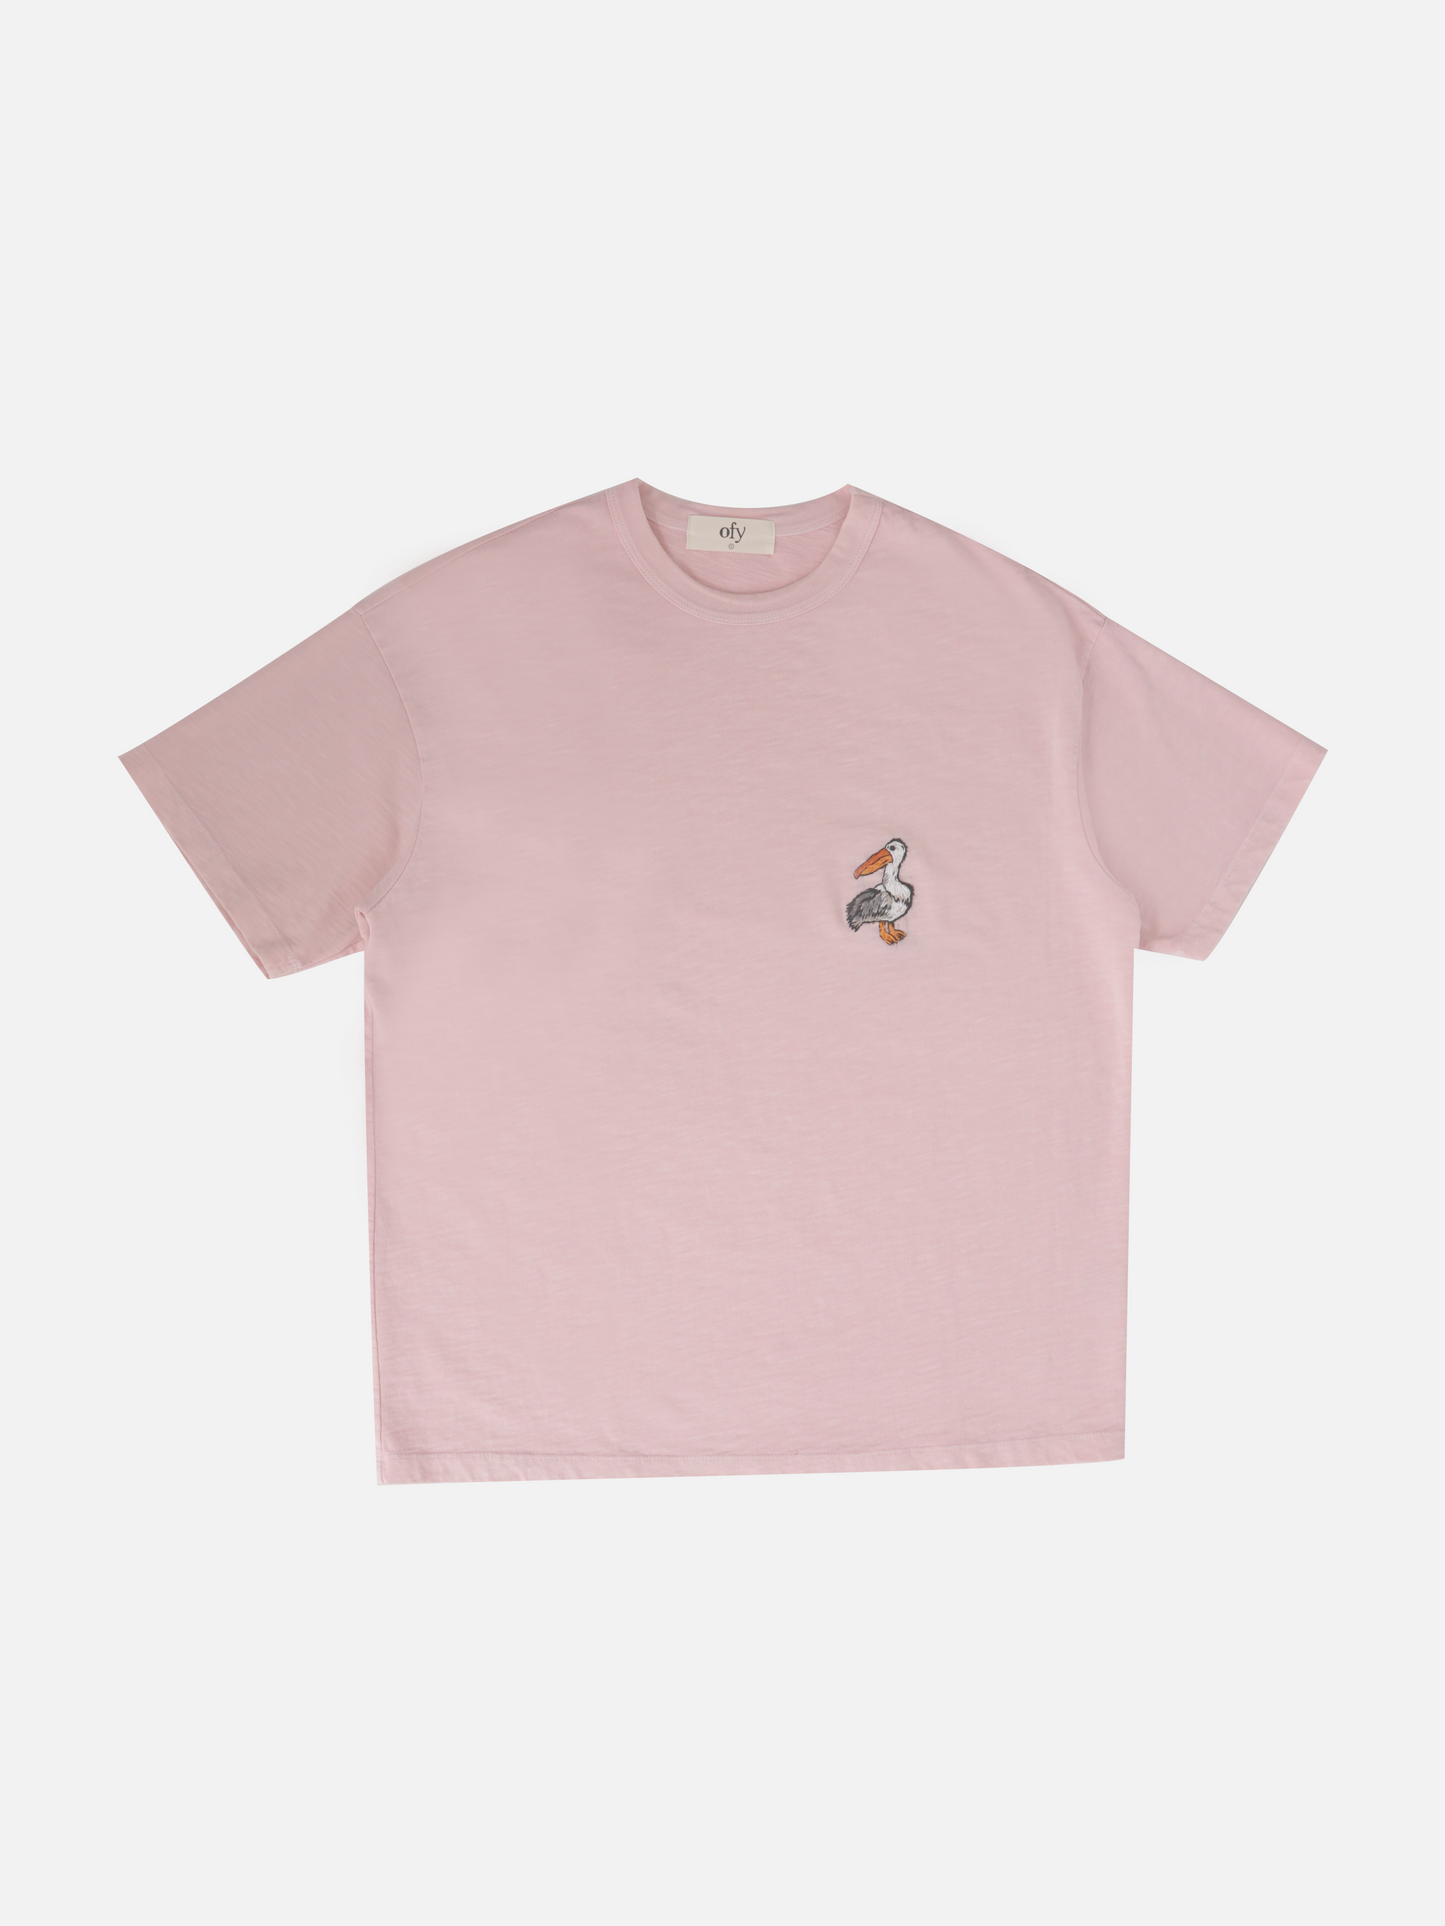 Embroidered Journey Tee - Pelican